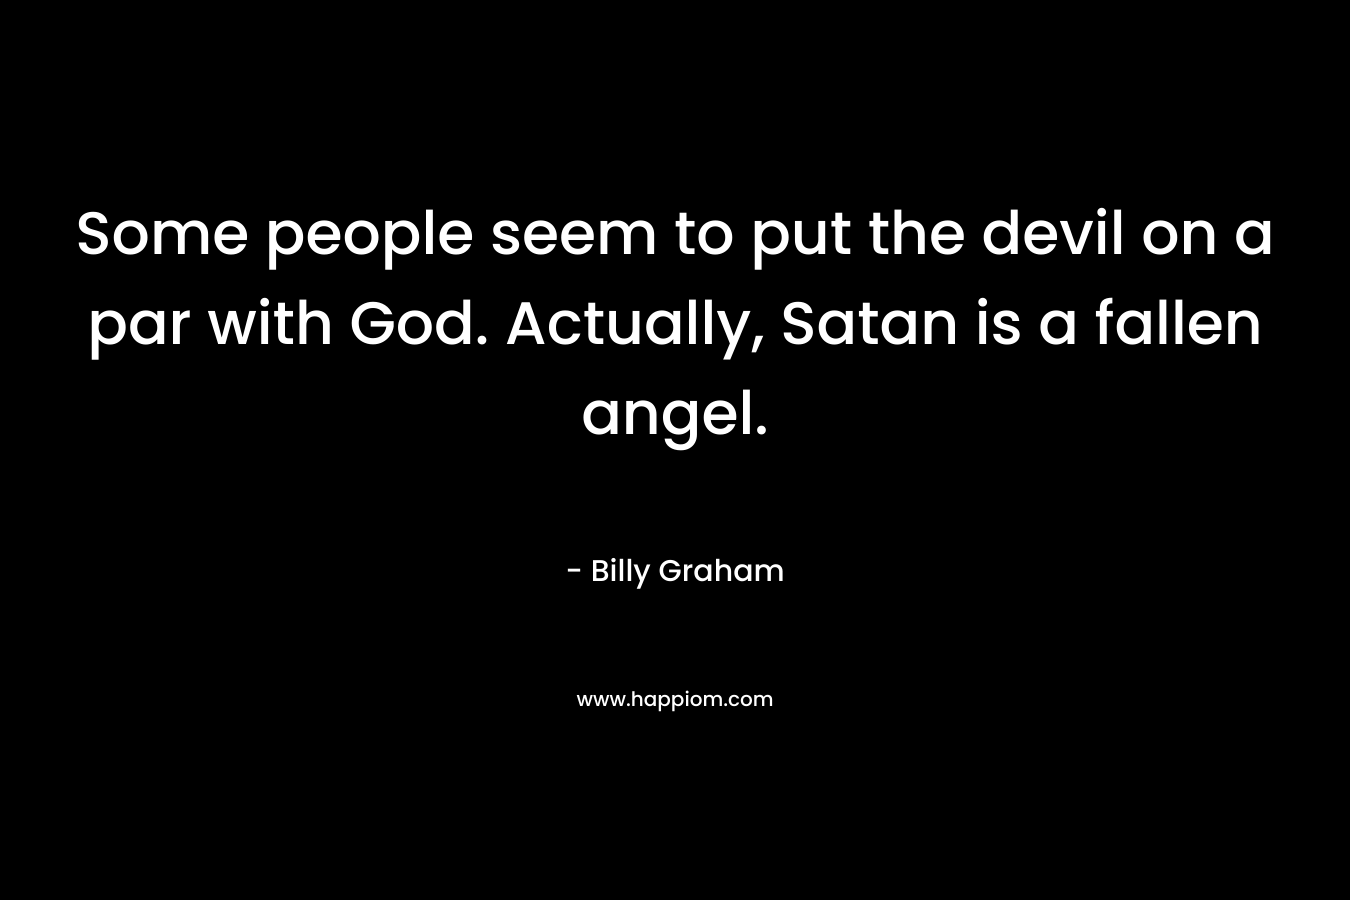 Some people seem to put the devil on a par with God. Actually, Satan is a fallen angel. – Billy Graham